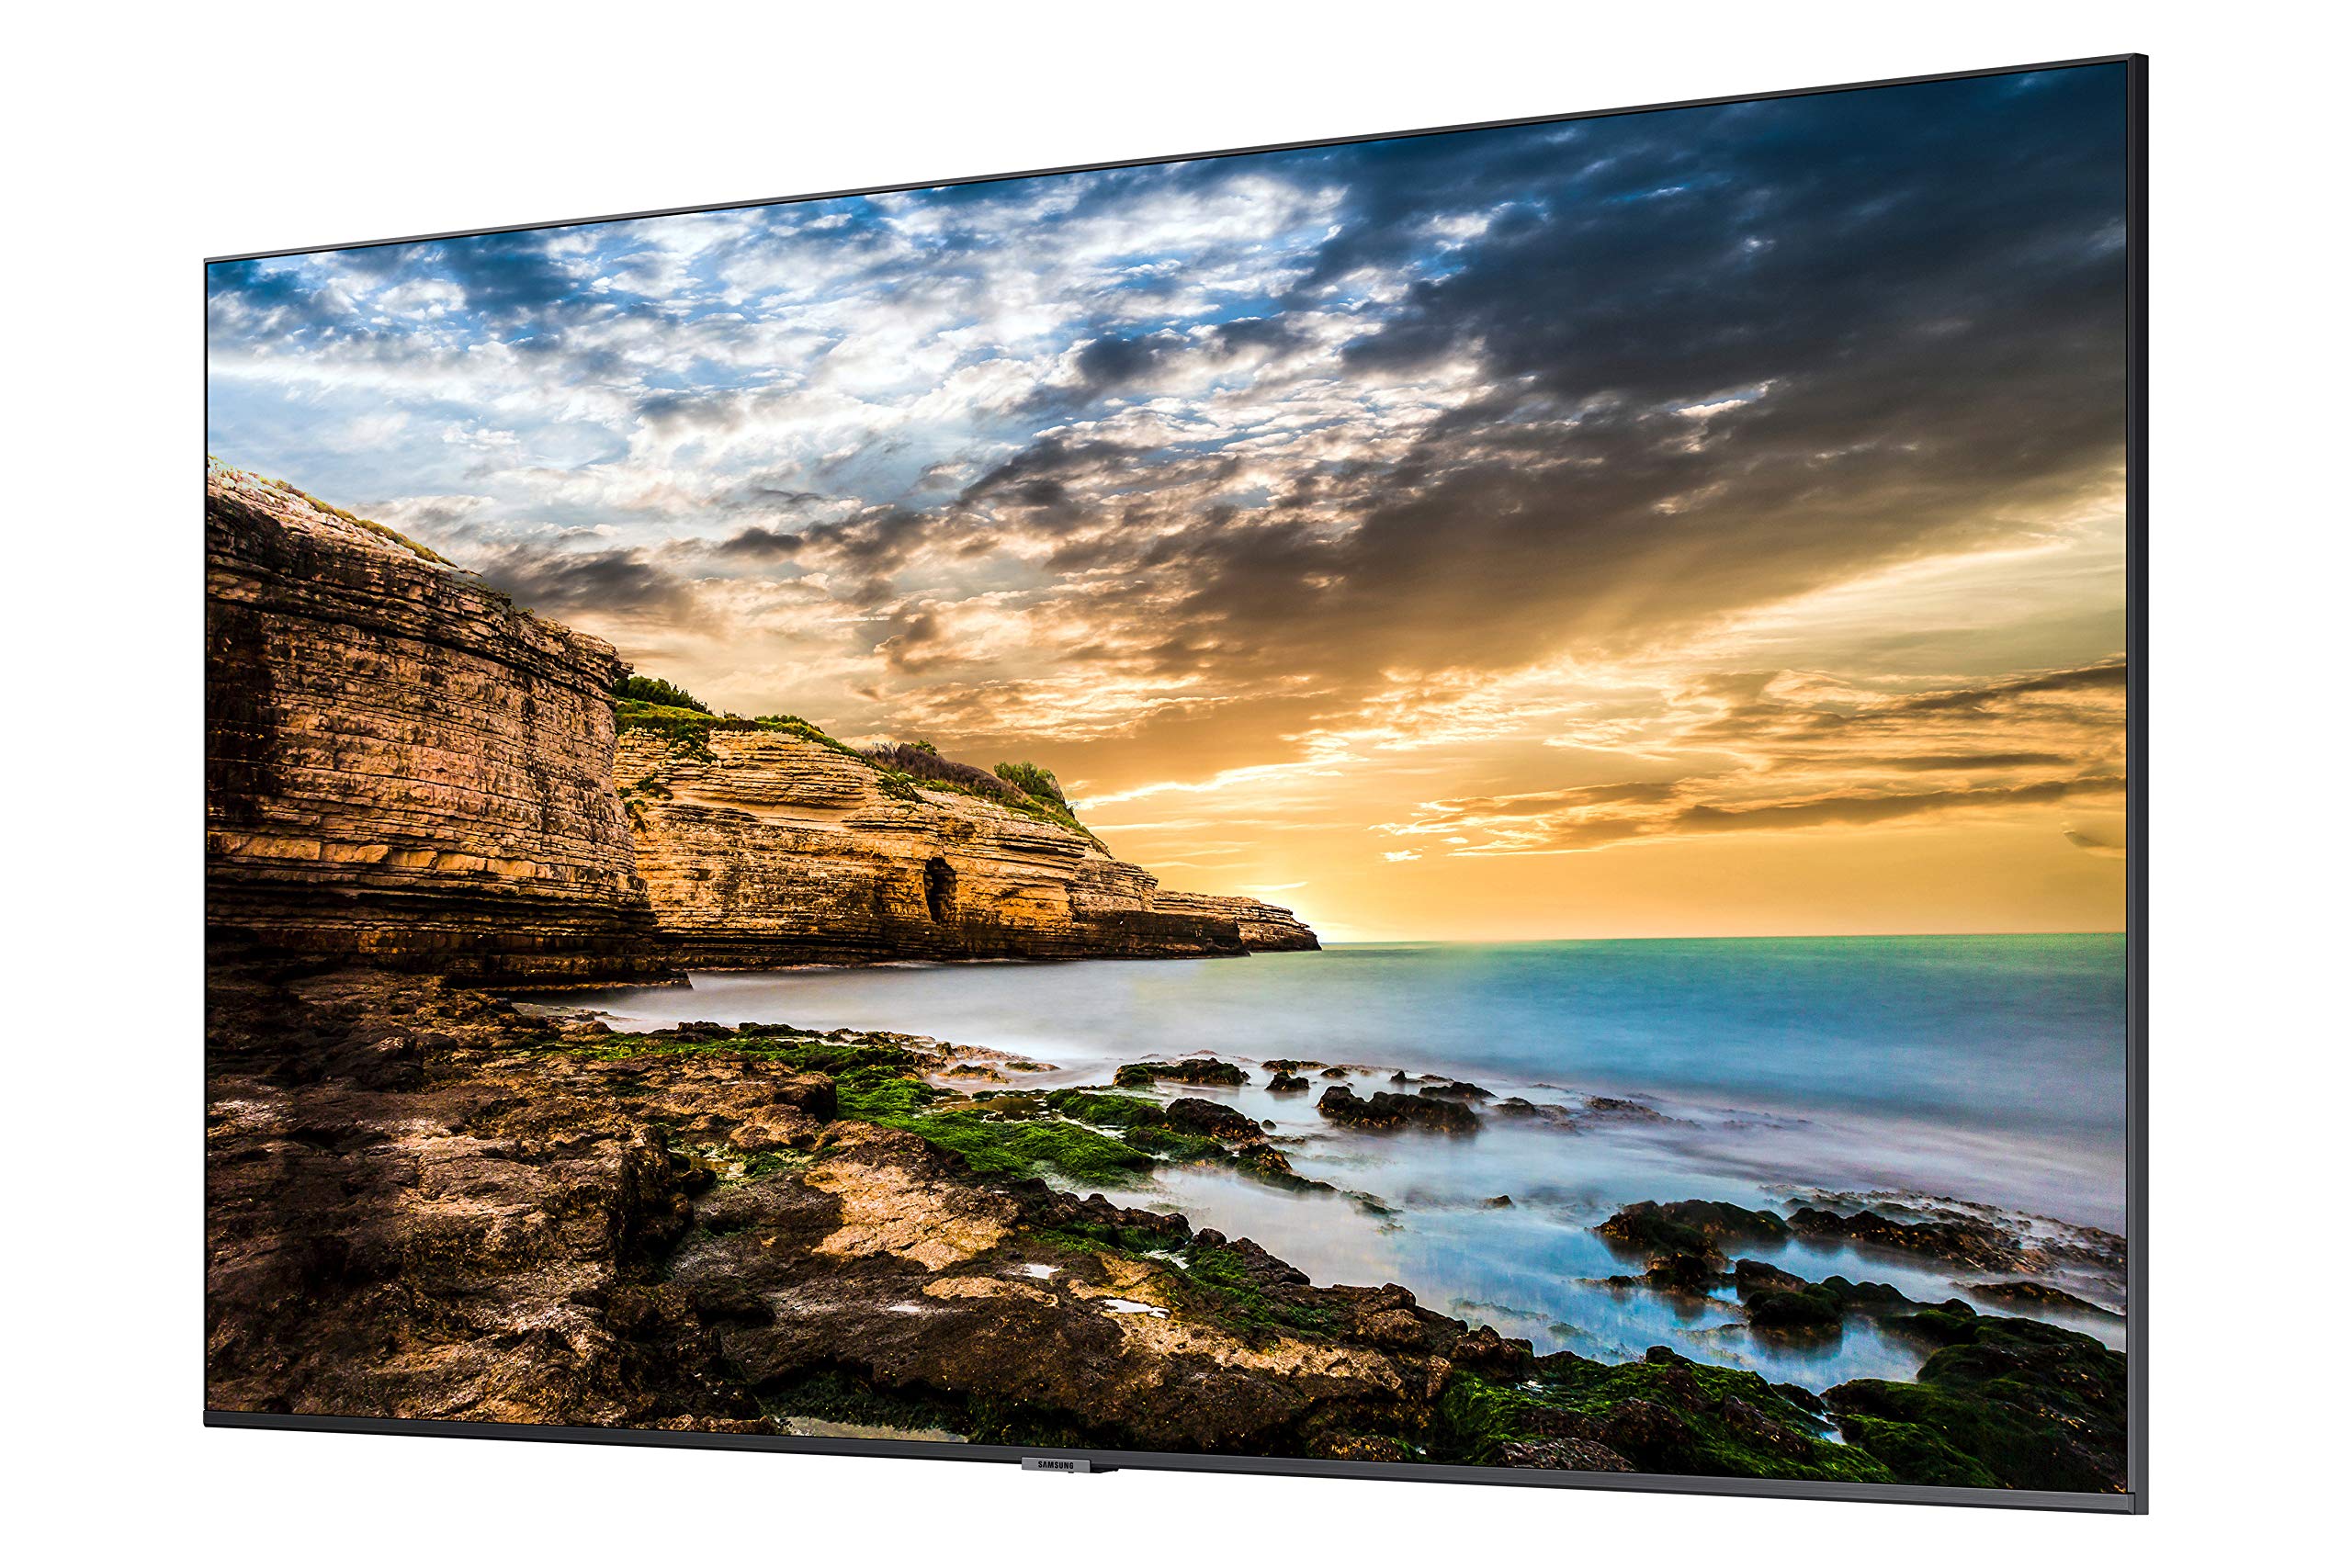 SAMSUNG Business QE55T 55-inch 4K UHD 3840x2160 LED Commercial Signage Display, HDMI, USB, Speakers, 3-Yr Warranty, 16/7 Operation, 300 nit (LH55QETELGCXGO), Black